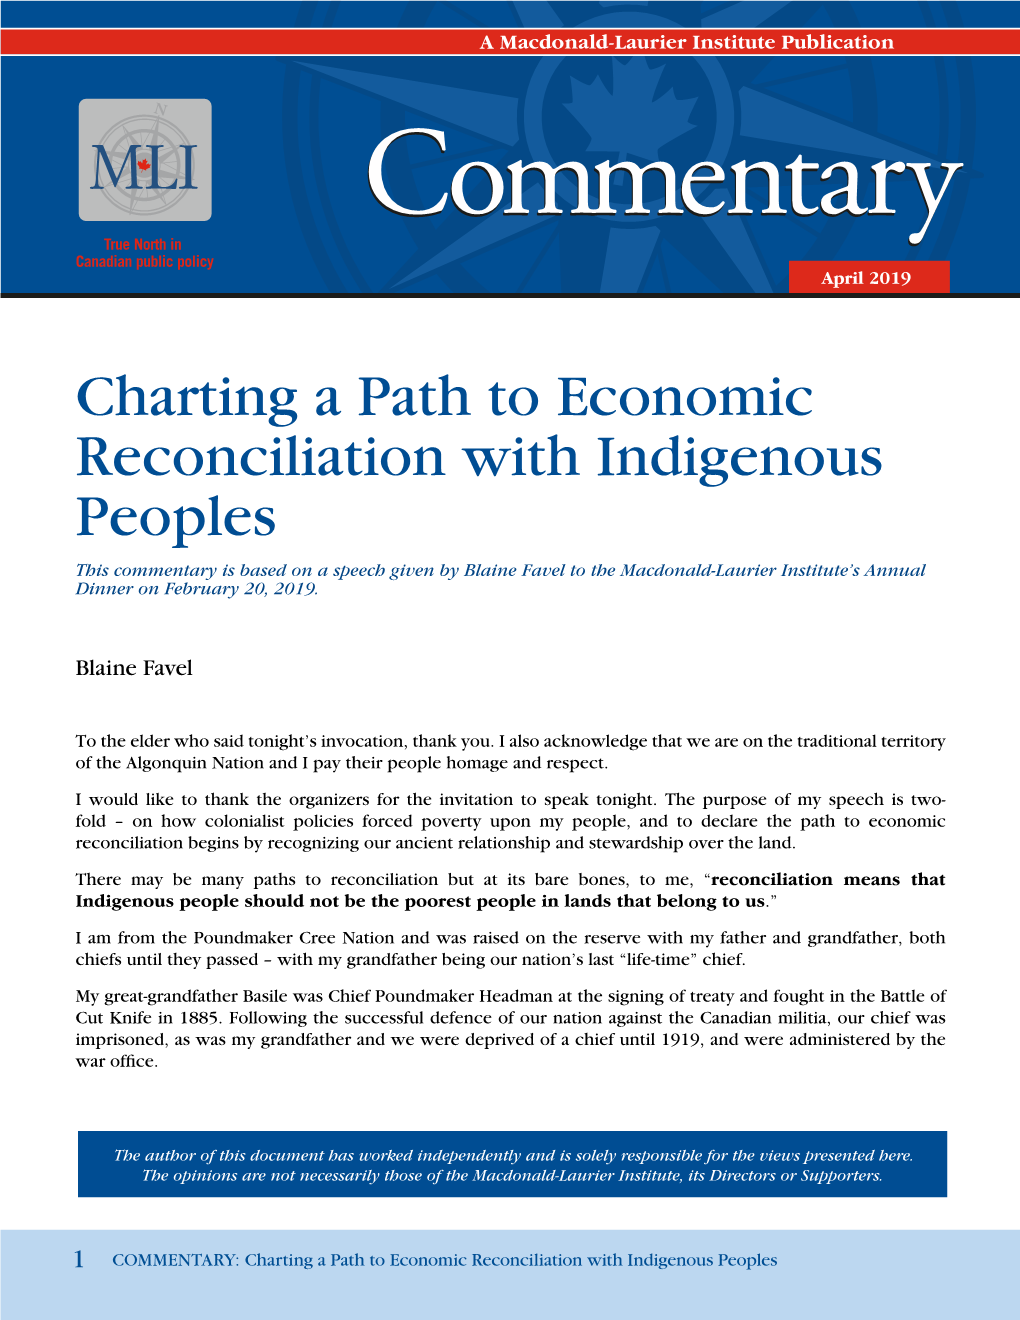 Charting a Path to Economic Reconciliation with Indigenous Peoples